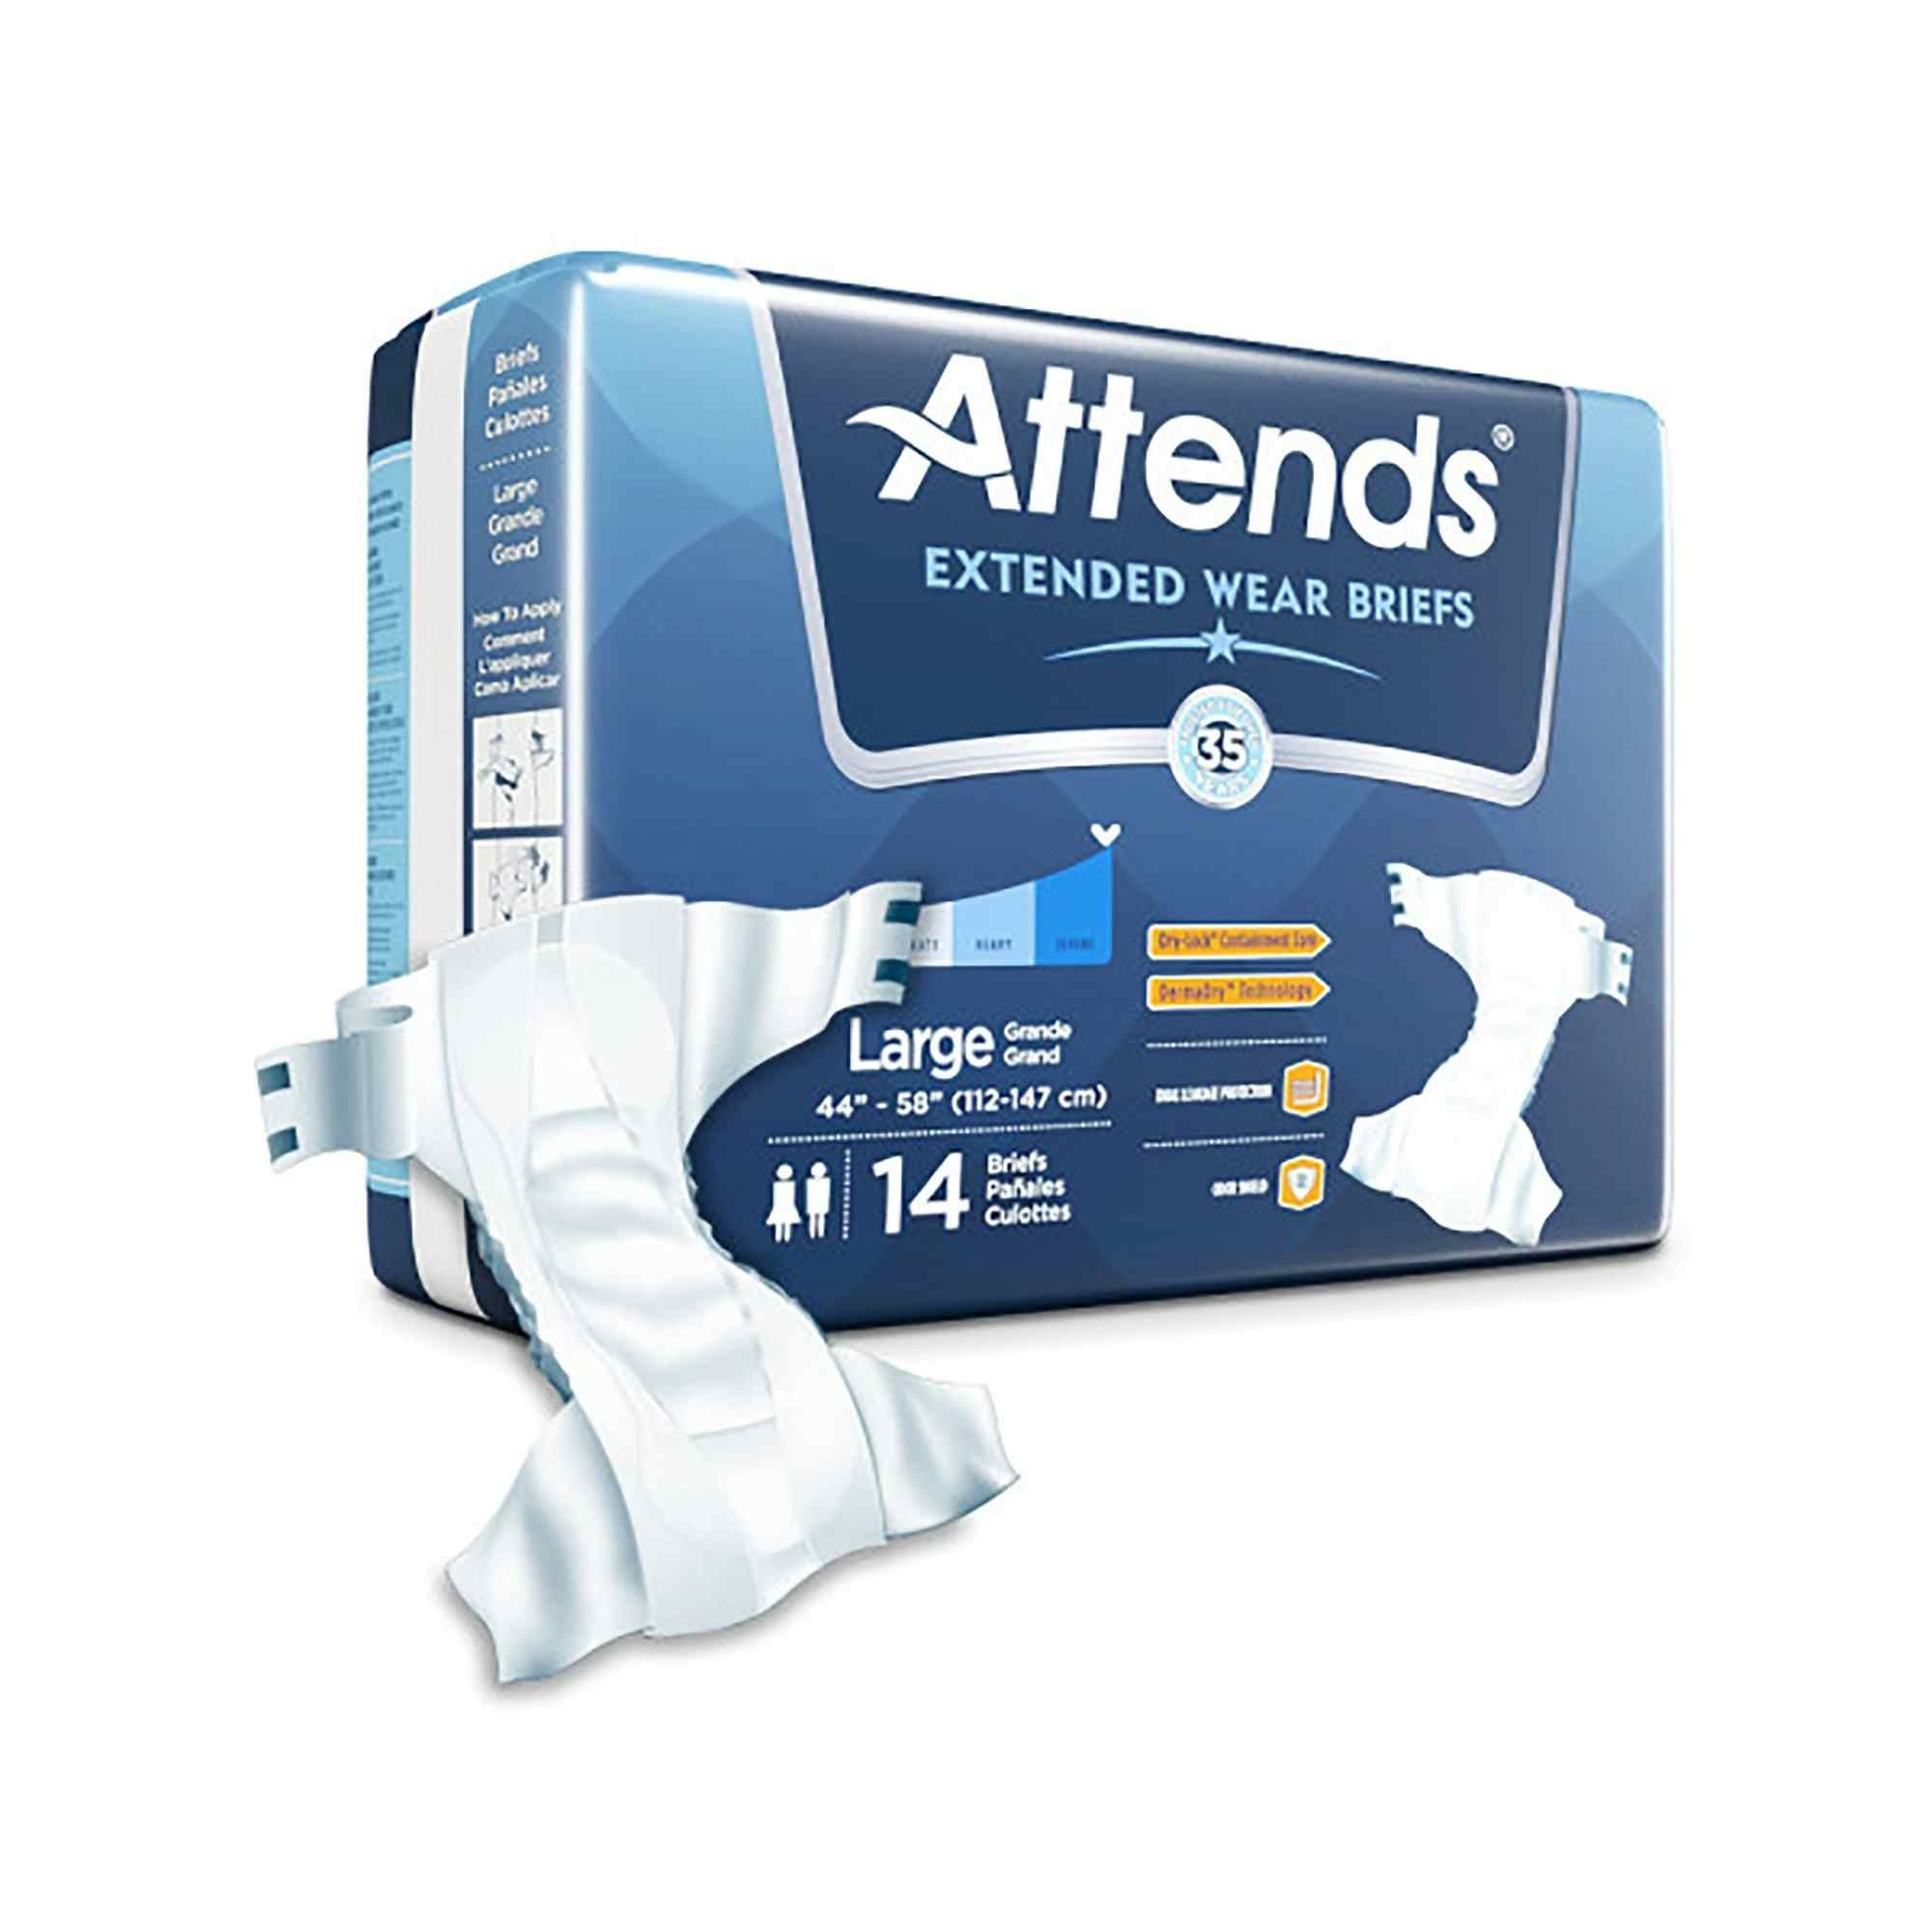 Attends Extended Wear Brief Adult Diapers with Tabs, Severe Absorbency, DDEW30, Large (44-58") - Bag of 14